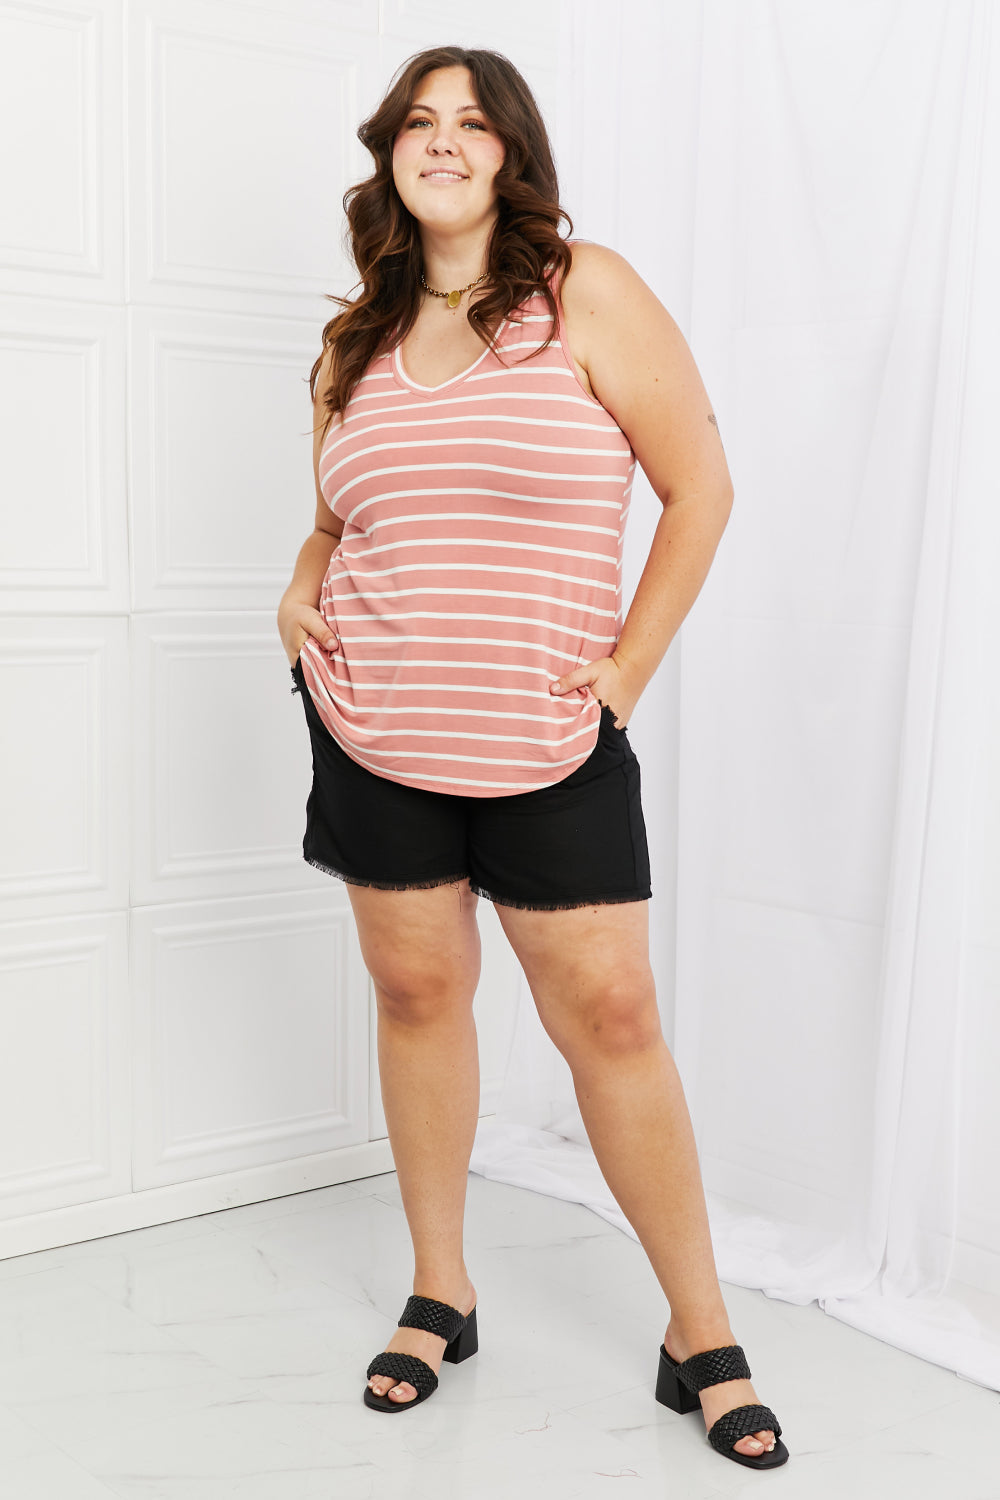 Find Your Path Full Size Sleeveless Striped Top - Women’s Clothing & Accessories - Shirts & Tops - 4 - 2024